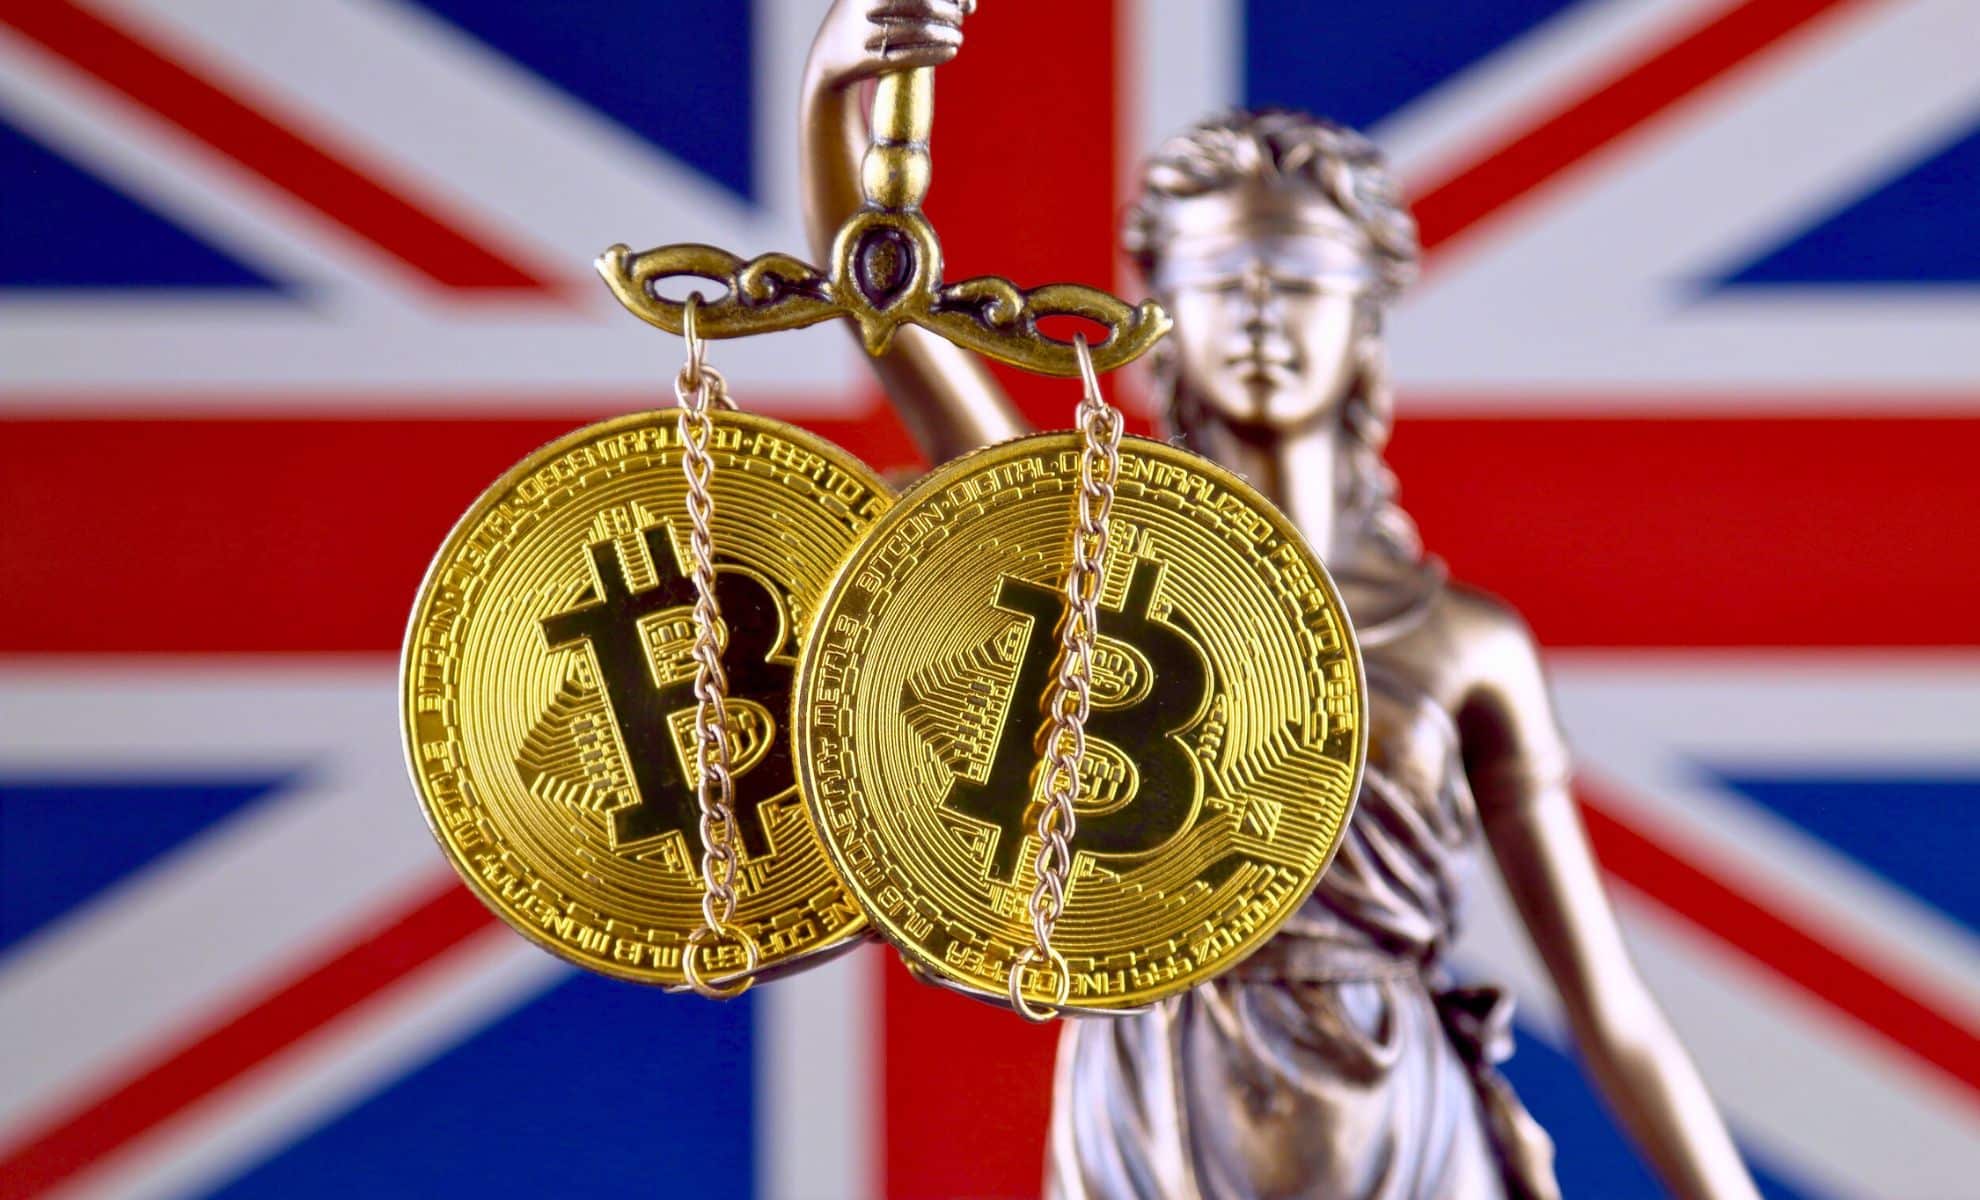 the-uk-plans-to-introduce-crypto-legislation-within-6-months